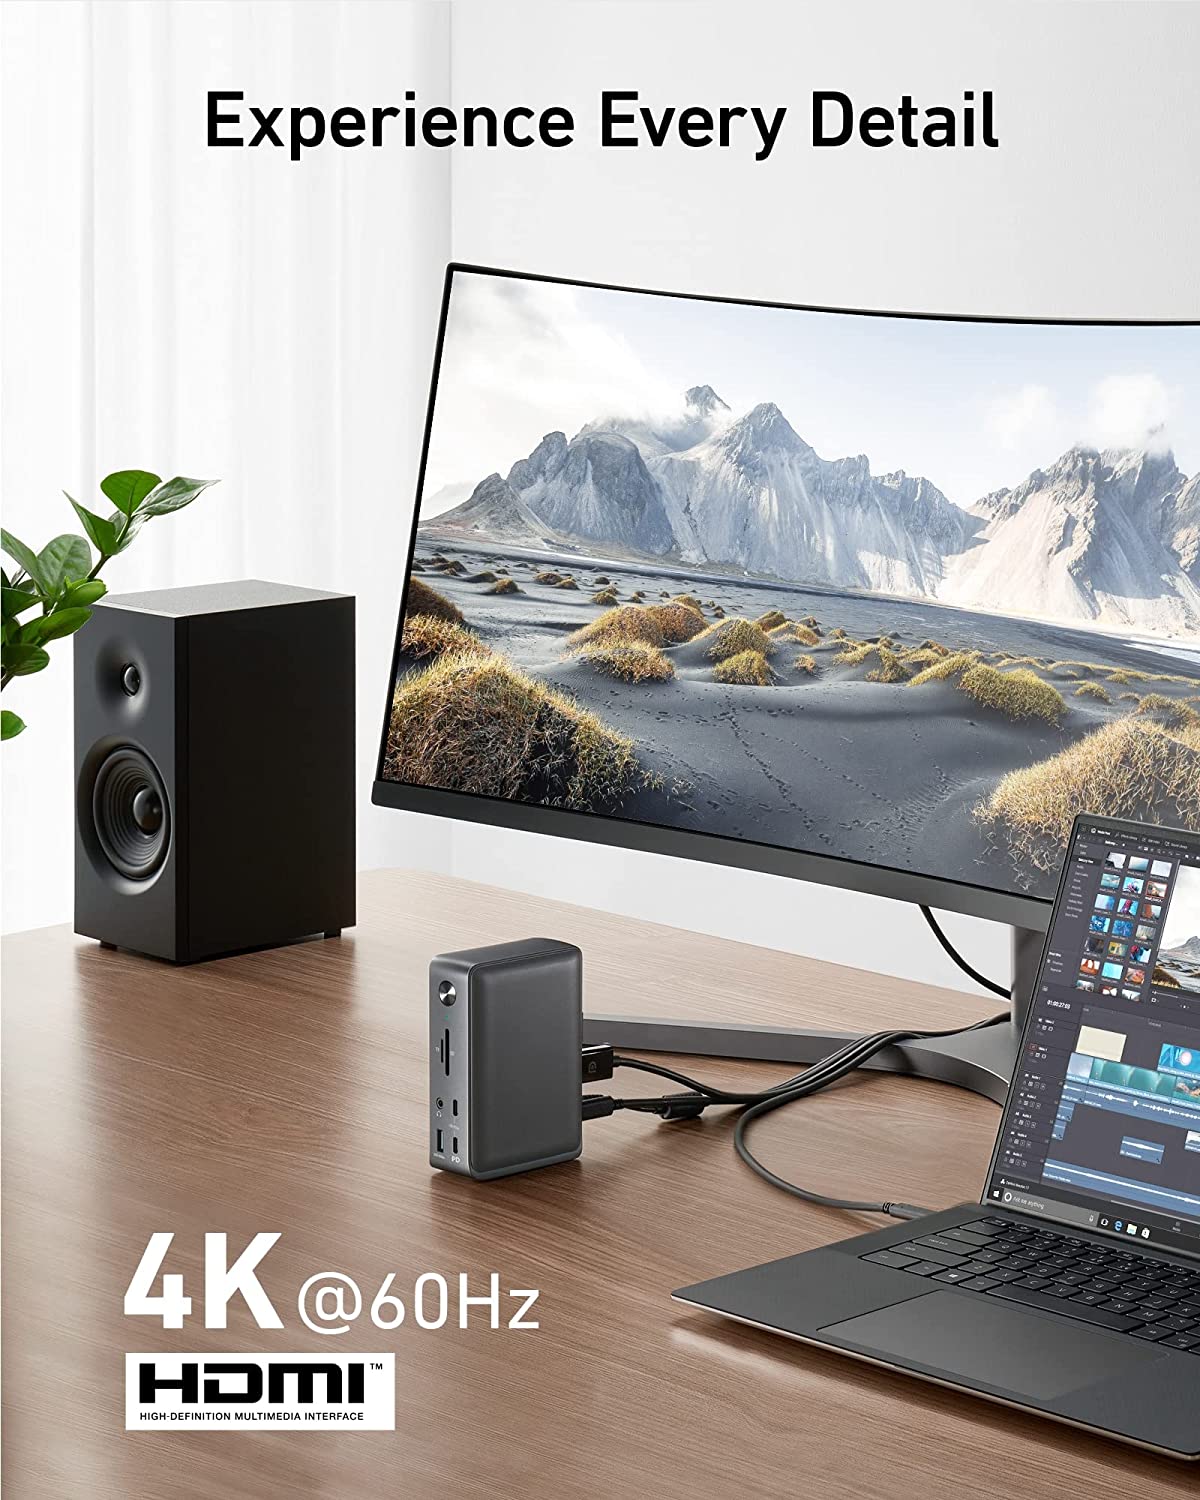 Anker Docking Station, PowerExpand 13-in-1 USB-C Dock, 85W Charging for Laptop, 18W Charging for Phone, 4K HDMI, 1Gbps Ethernet, Audio, USB-A Gen 1, USB-C Gen 2, SD 3.0